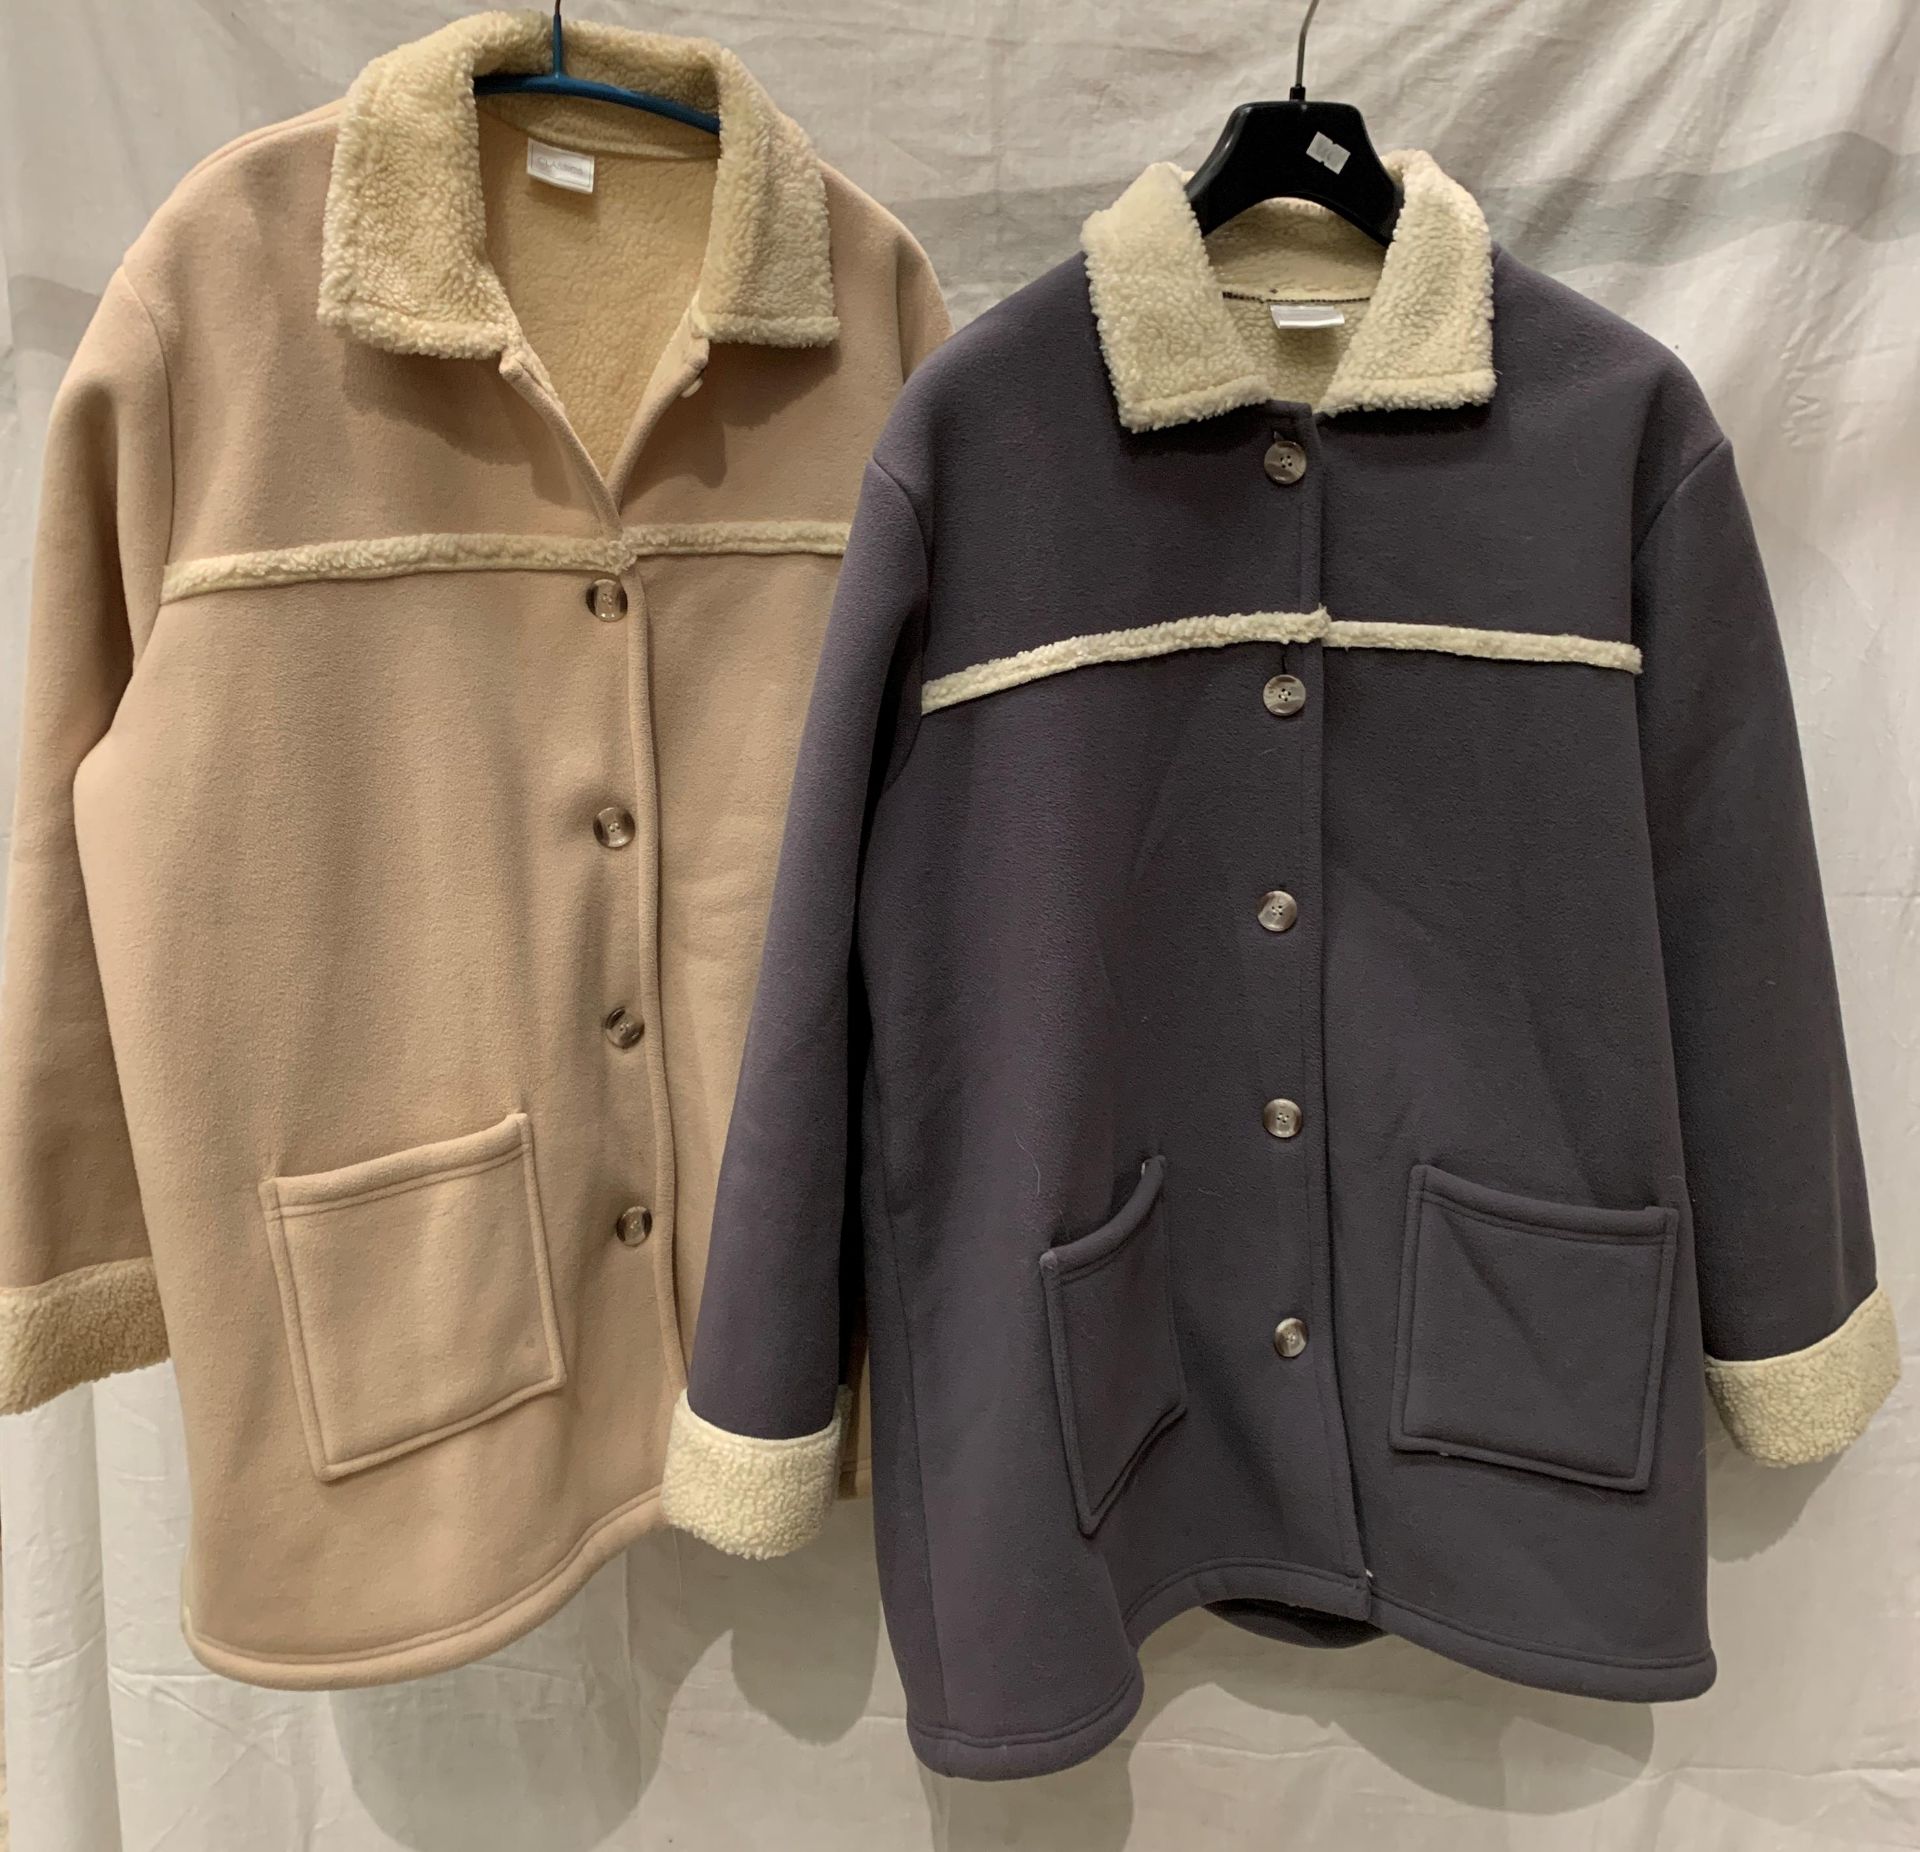 Two ladies fleece jackets (grey and camel), with faux fur lining, sizes 20/22,